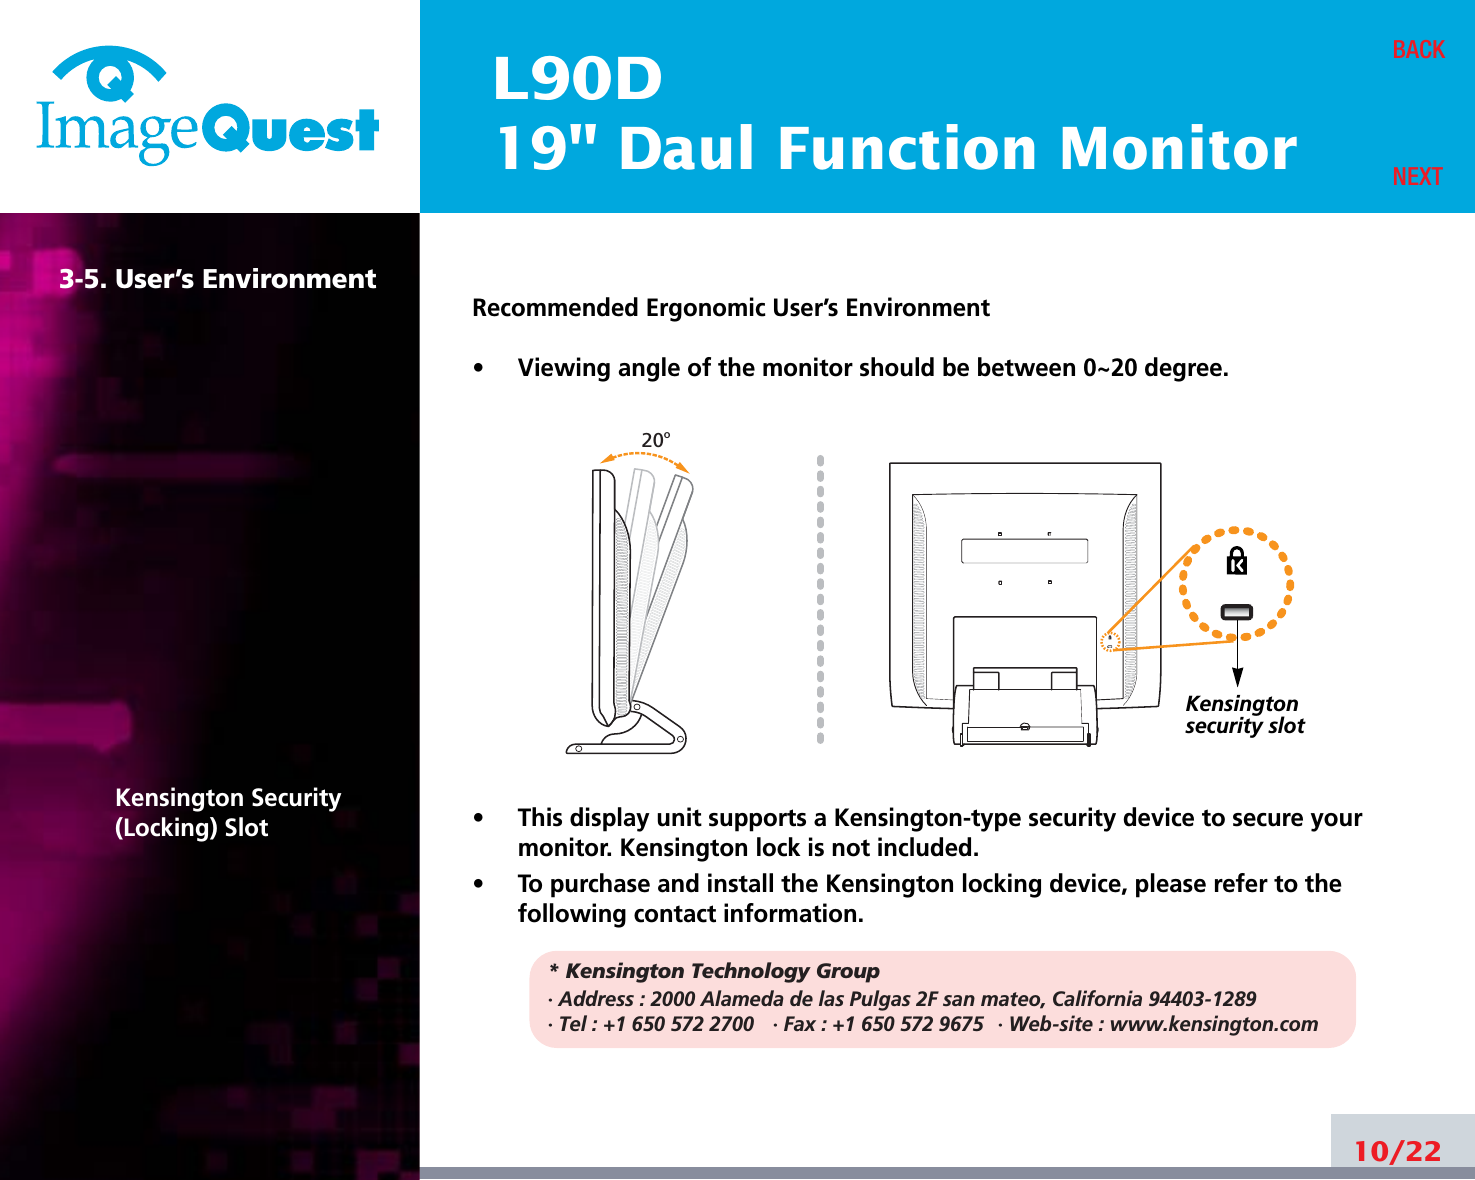 L90D19&quot; Daul Function Monitor3-5. User’s EnvironmentKensington Security(Locking) SlotRecommended Ergonomic User’s Environment•     Viewing angle of the monitor should be between 0~20 degree.•     This display unit supports a Kensington-type security device to secure yourmonitor. Kensington lock is not included.•     To purchase and install the Kensington locking device, please refer to thefollowing contact information.* Kensington Technology Group· Address : 2000 Alameda de las Pulgas 2F san mateo, California 94403-1289· Tel : +1 650 572 2700 · Fax : +1 650 572 9675 · Web-site : www.kensington.com10/22BACKNEXT20oKensington security slot